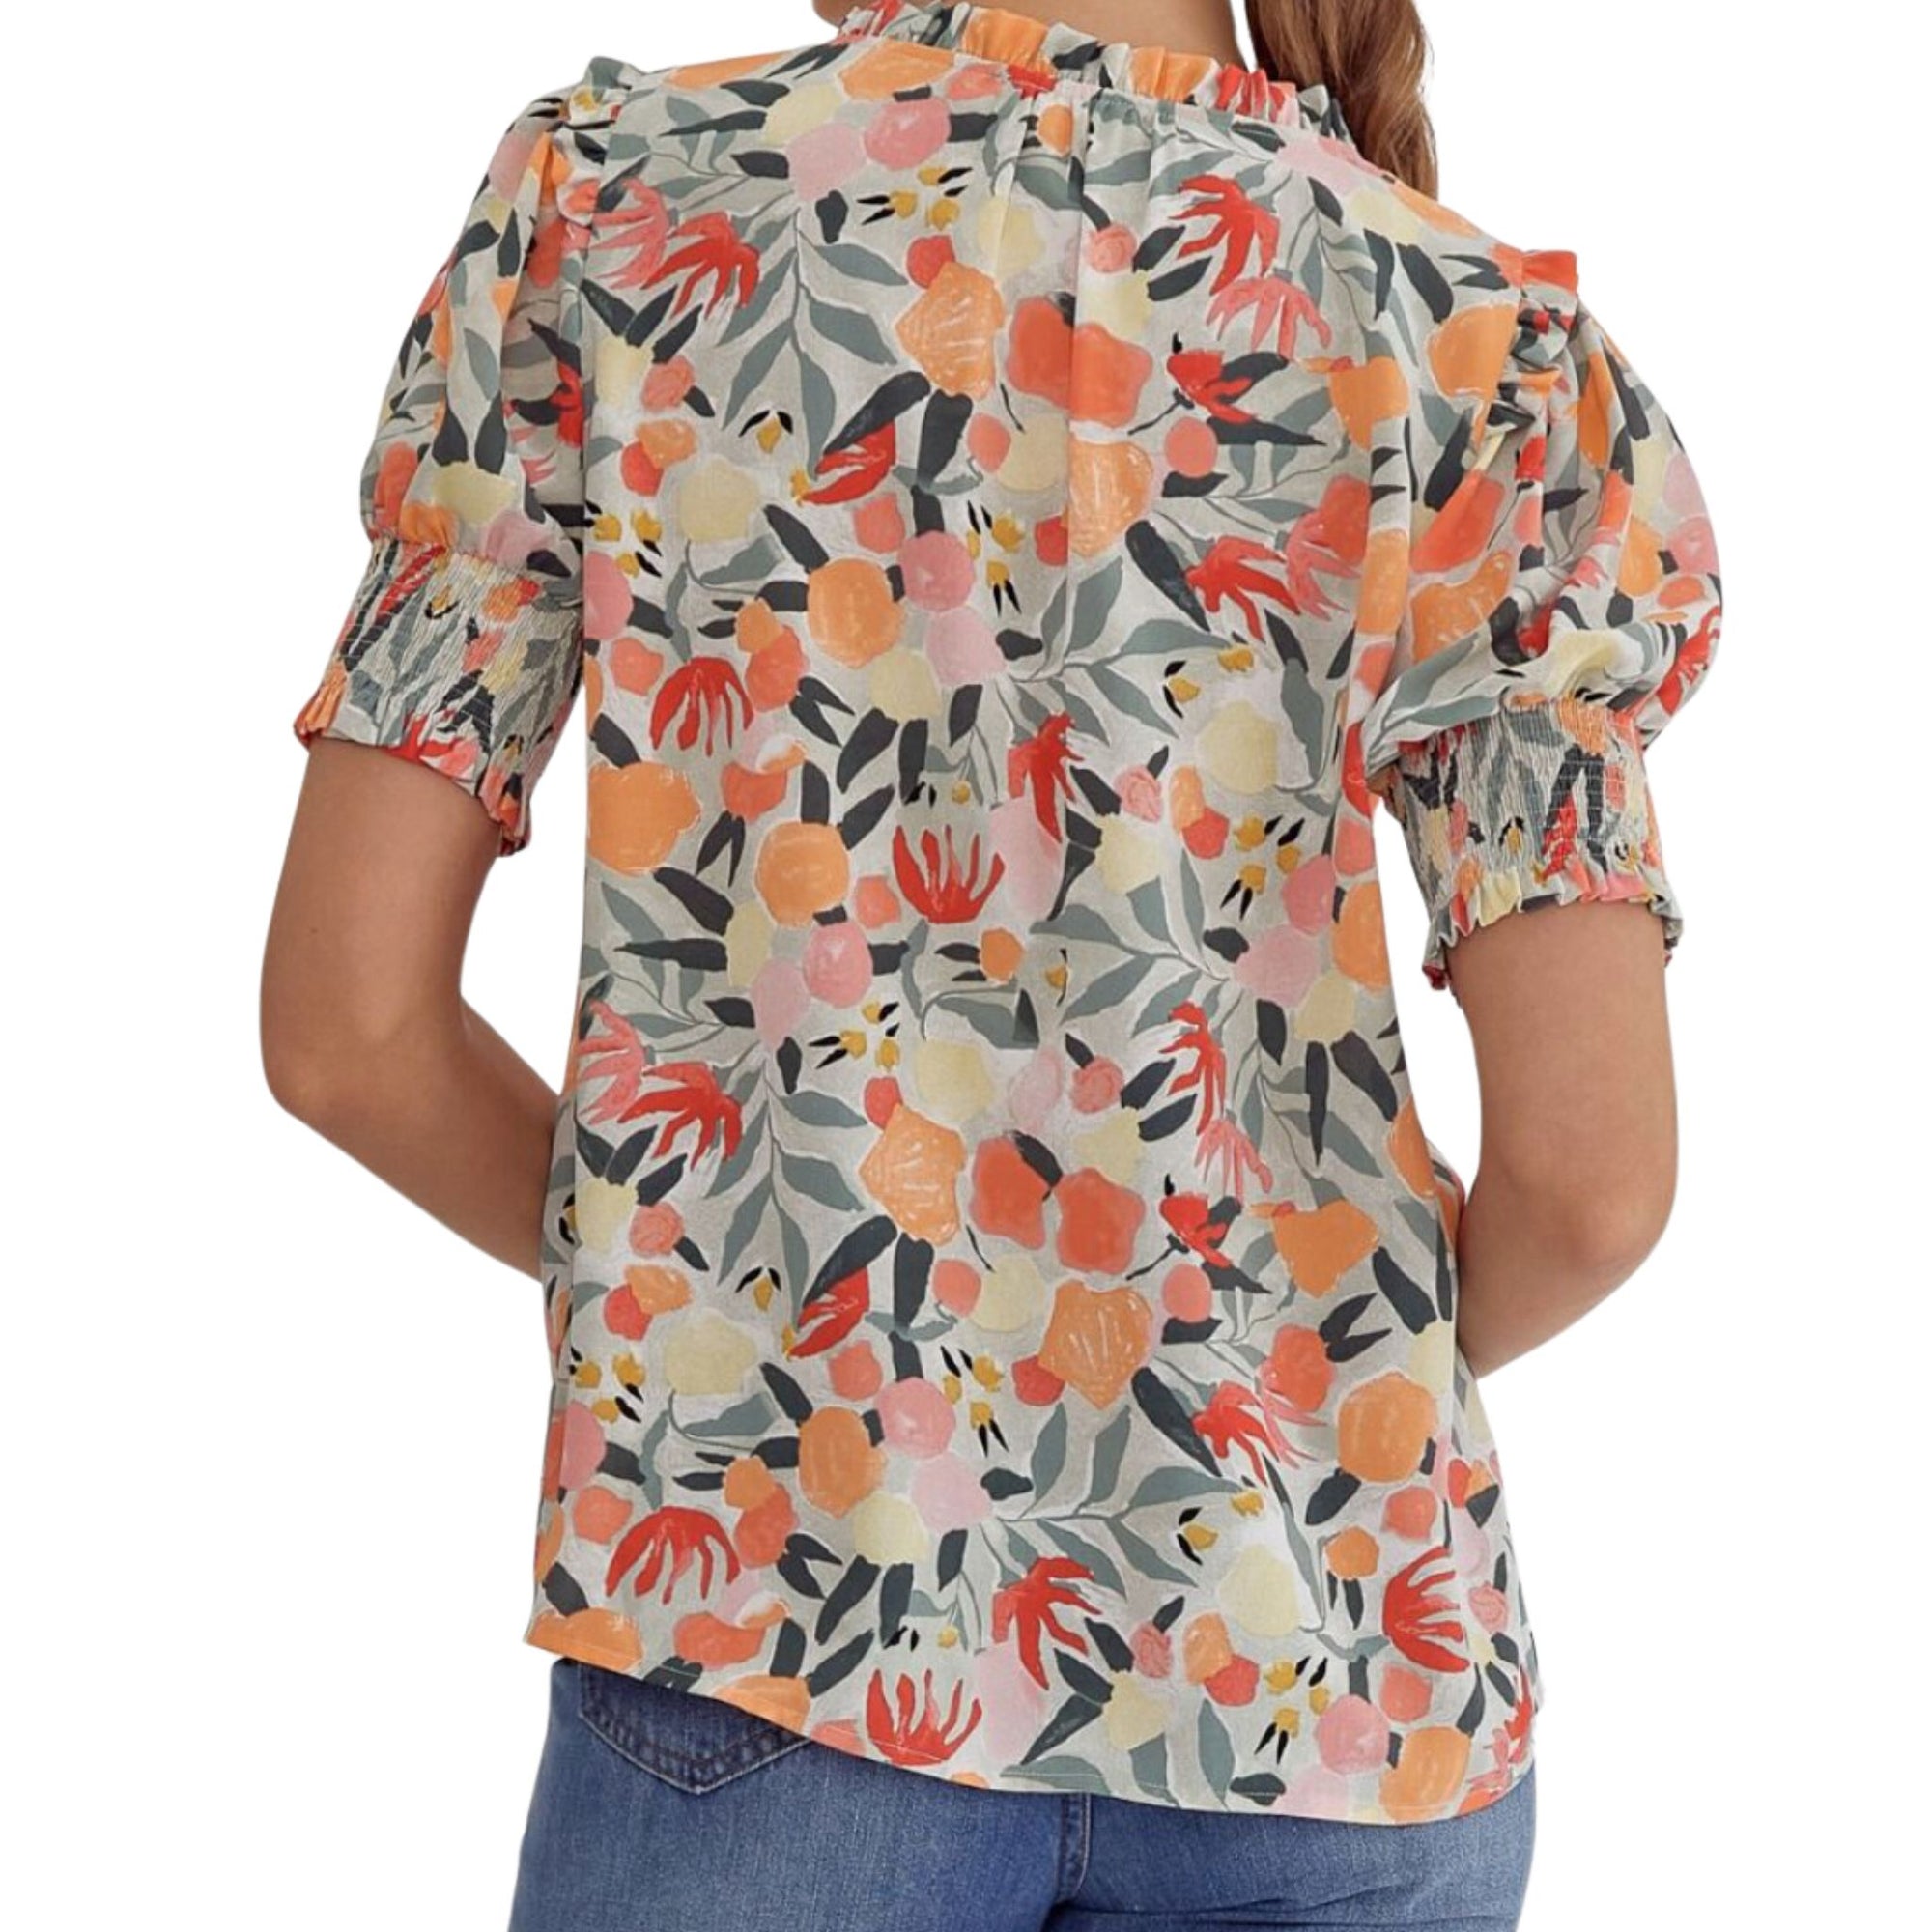 Main Squeeze Floral Top